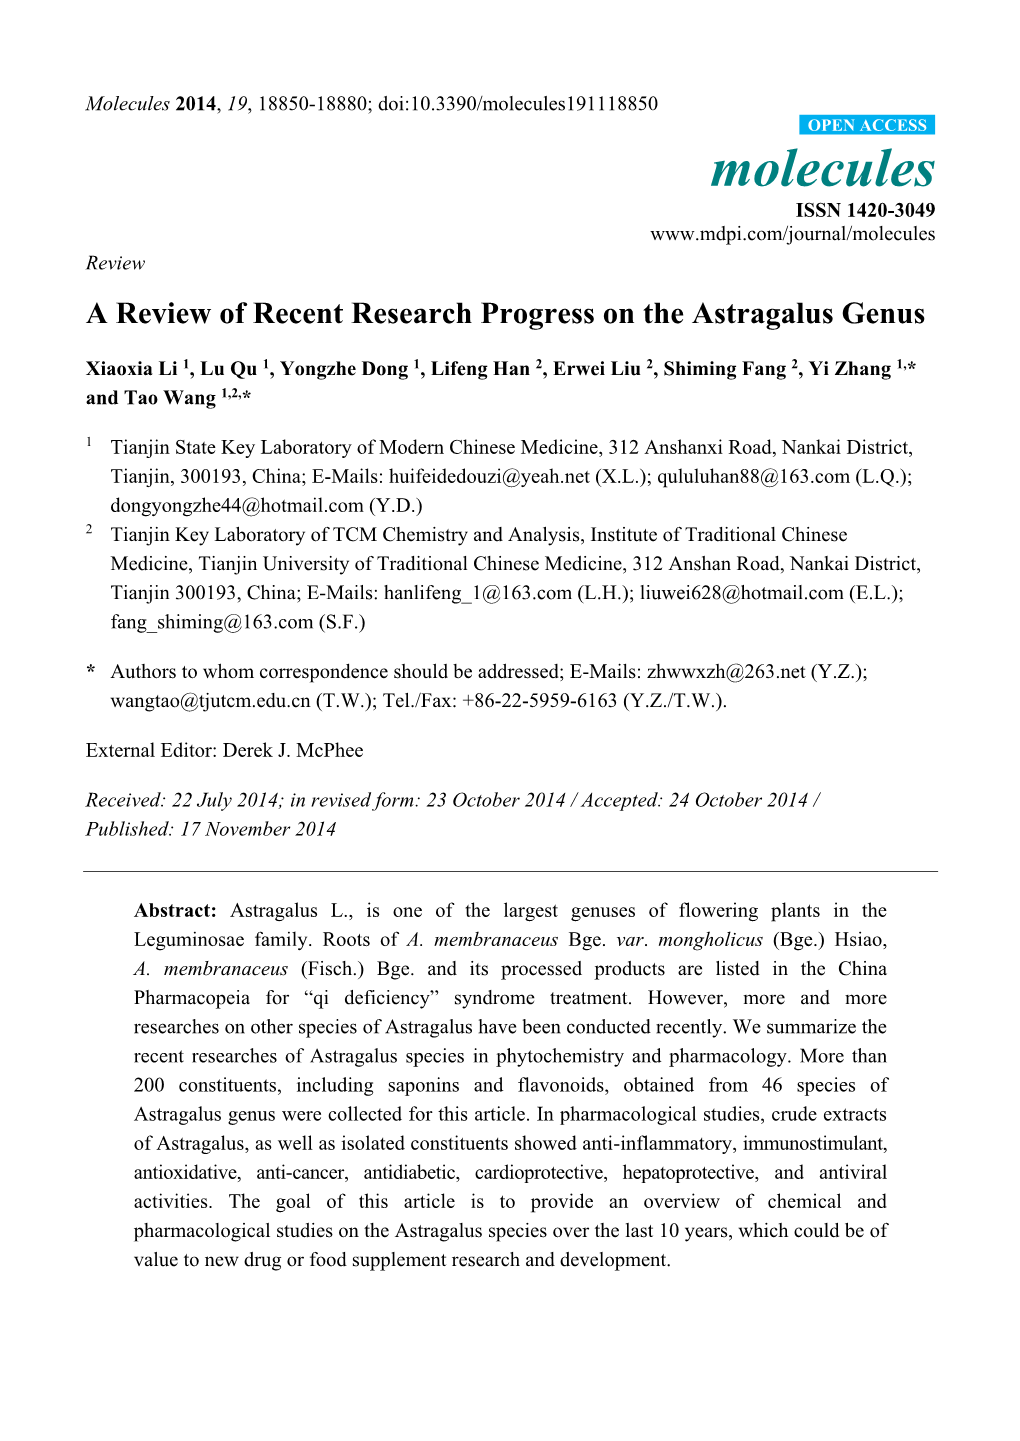 A Review of Recent Research Progress on the Astragalus Genus